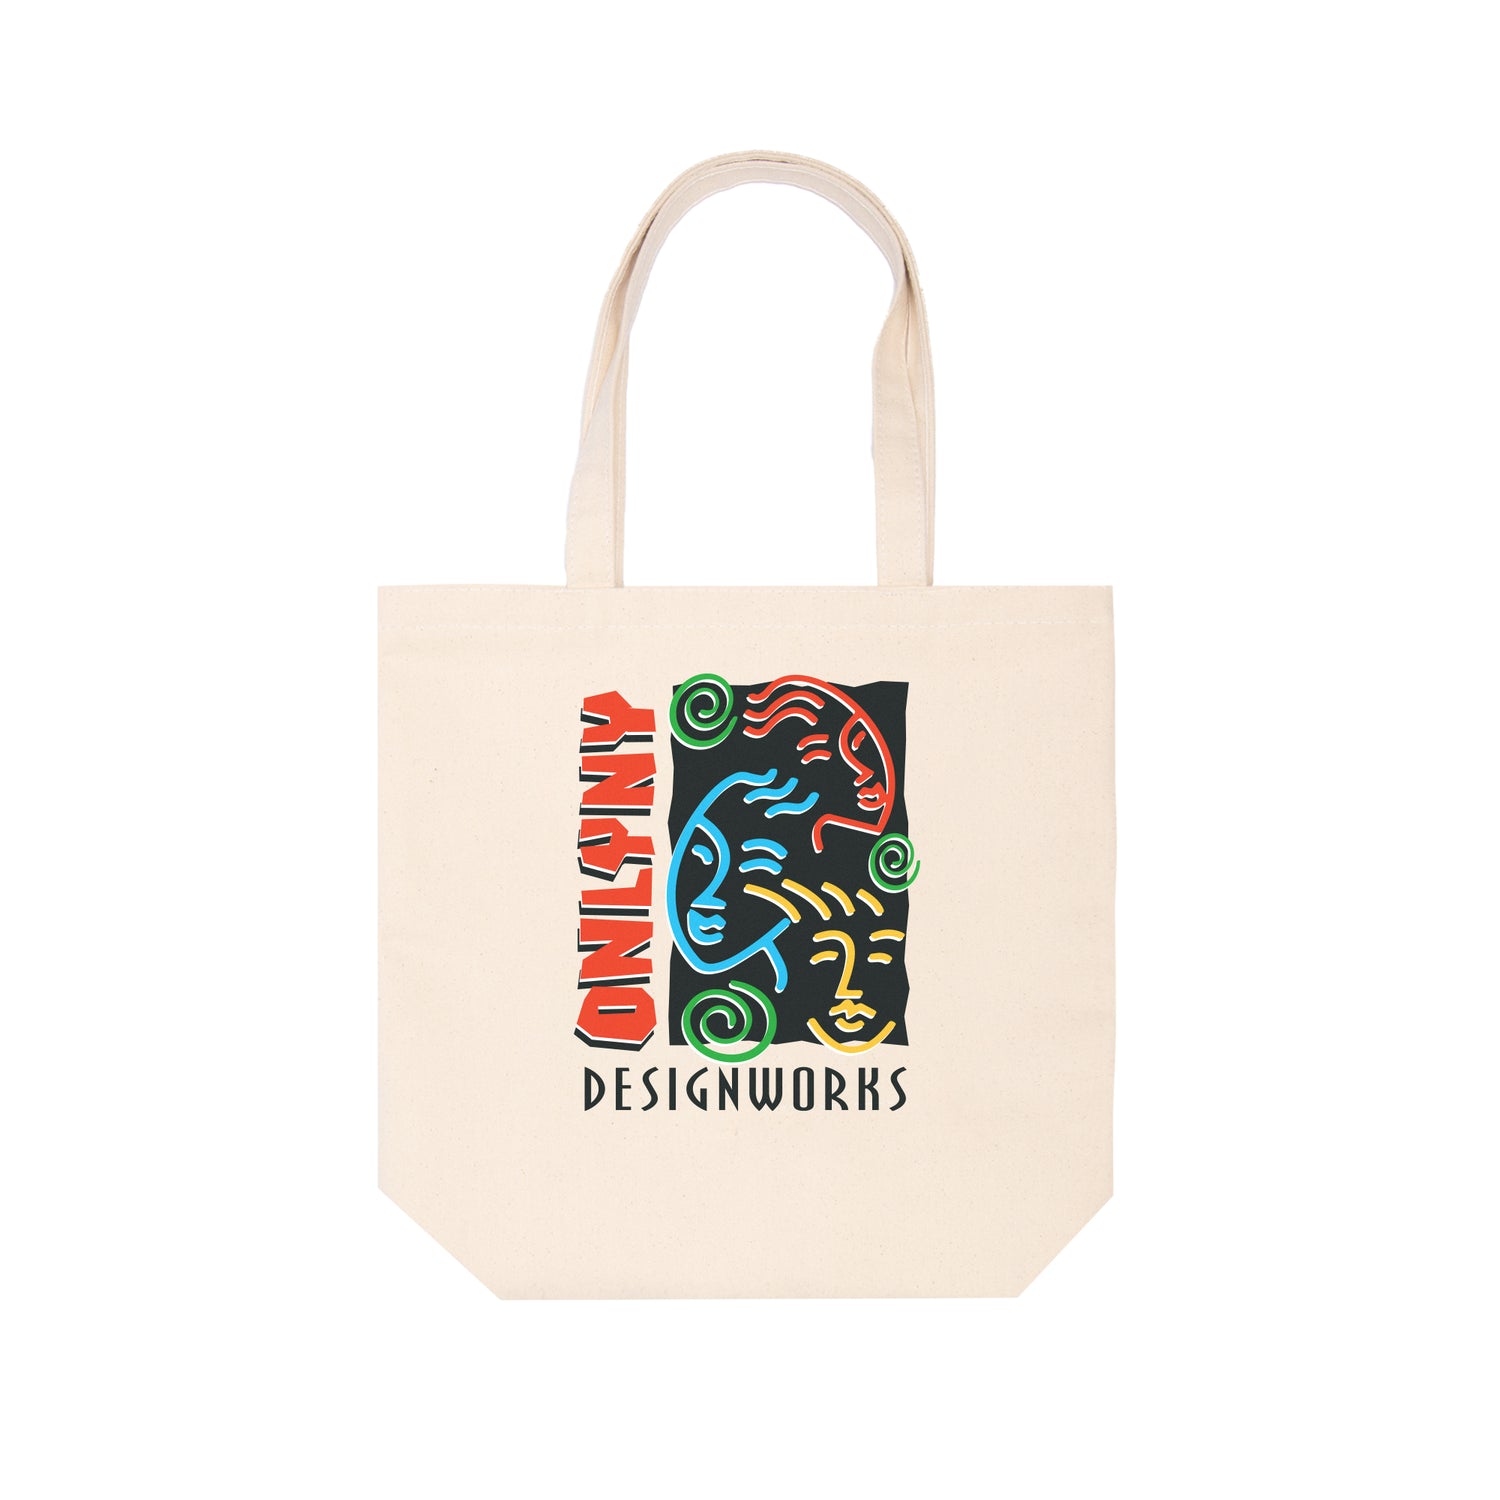 Only NY Design Works Tote Bag